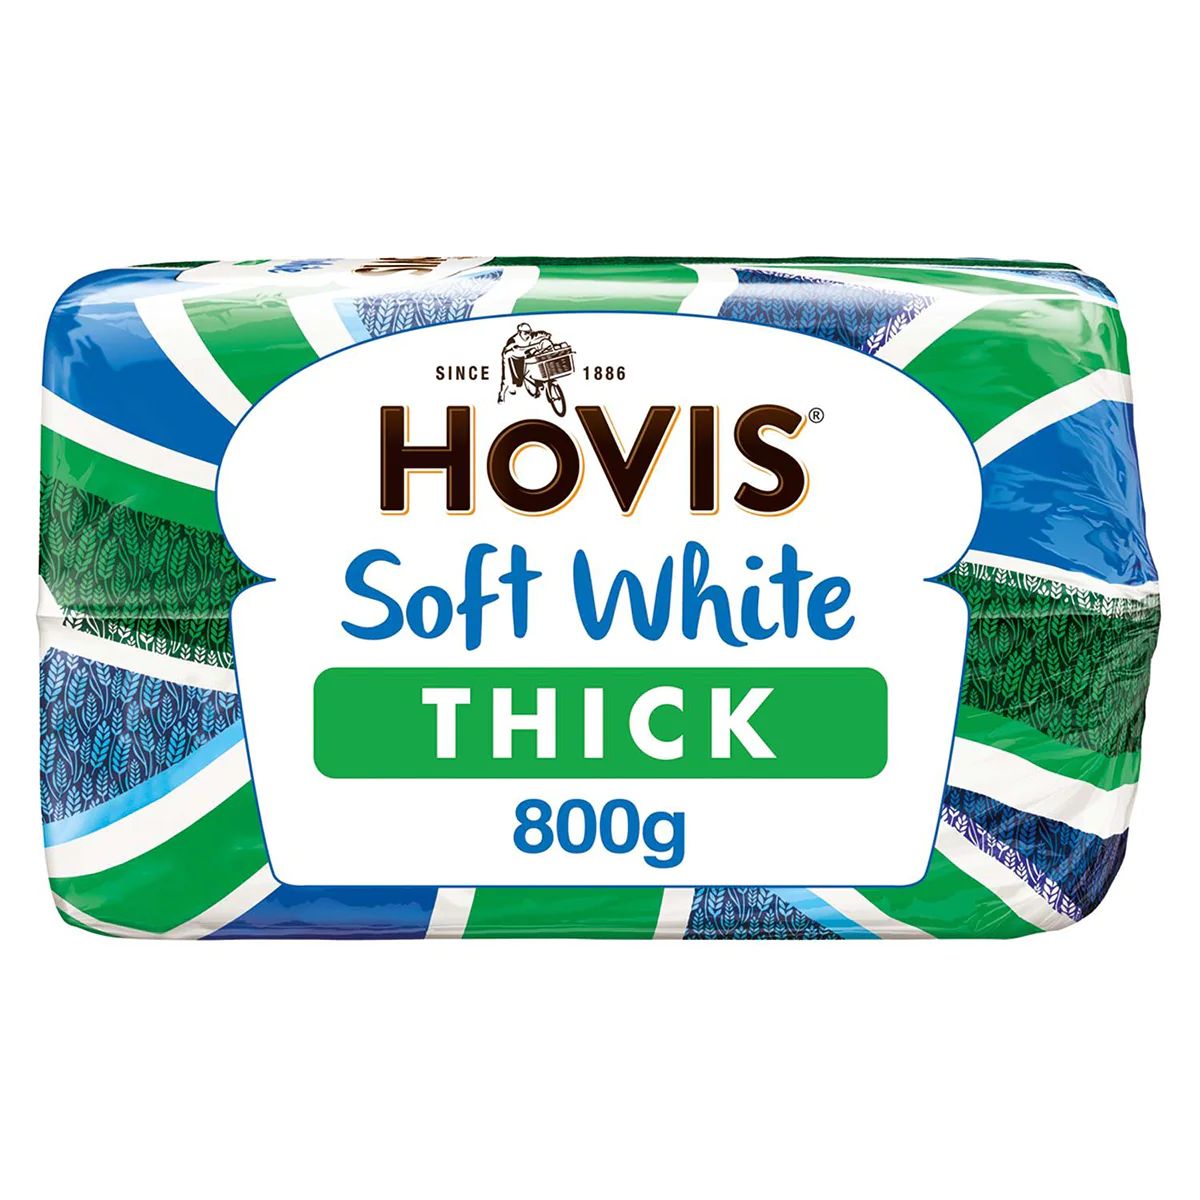 A package of Hovis - Soft White Thick Bread - 800g.